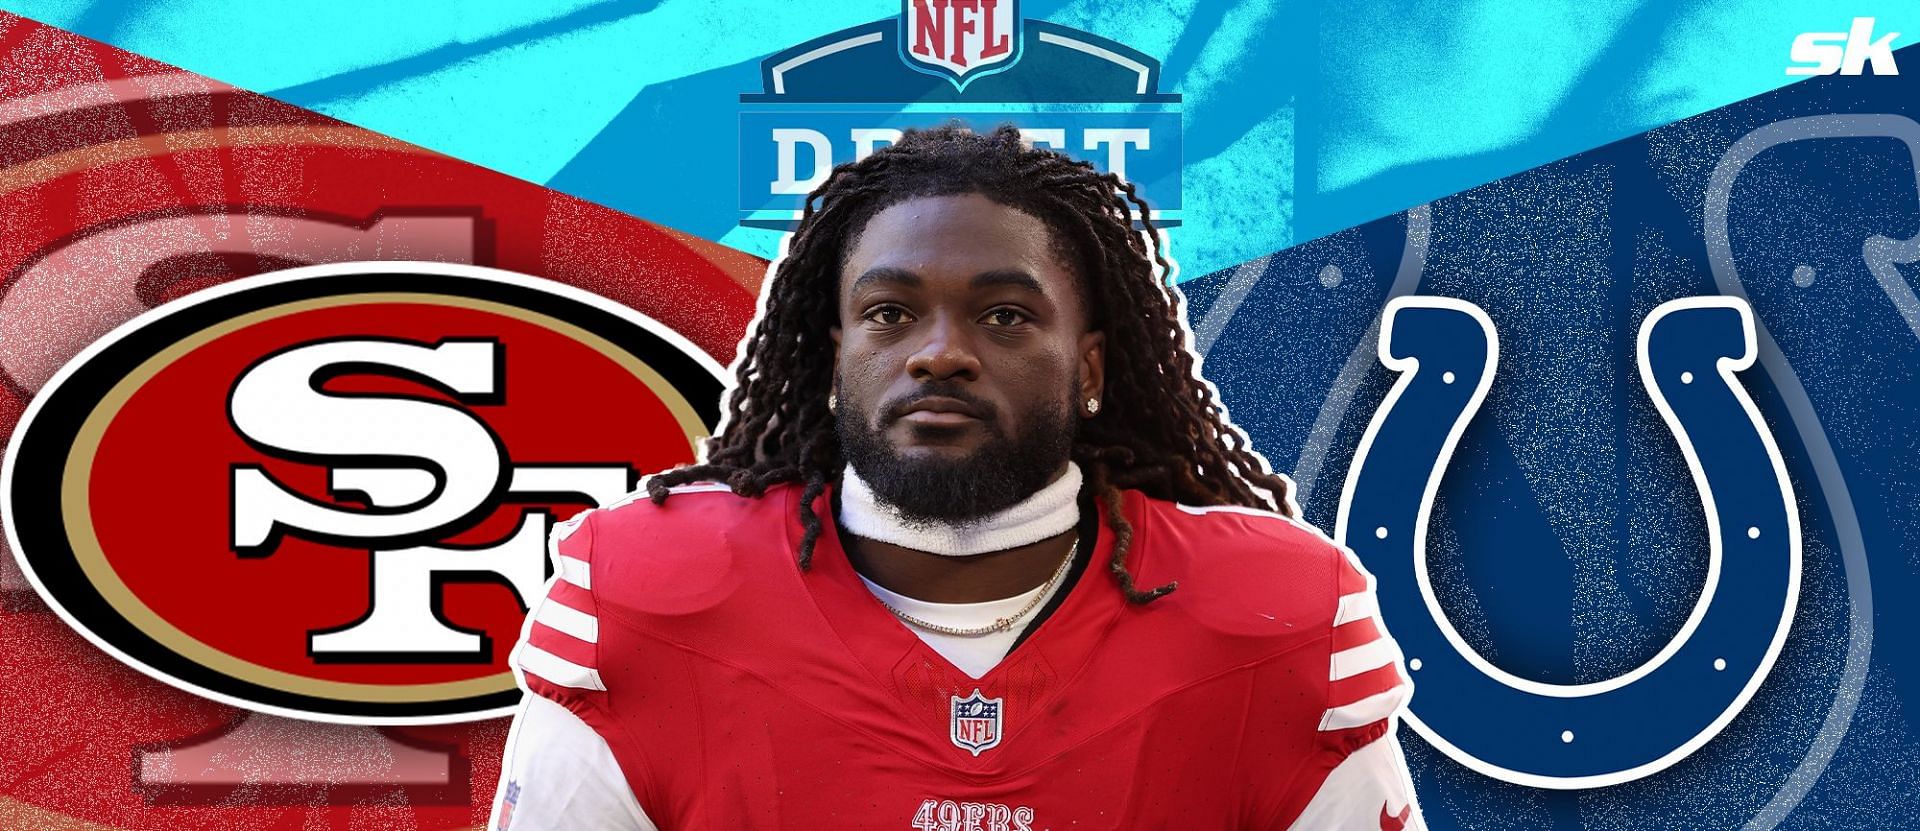 Aiyuk is yet to agree to terms with the San Francisco 49ers.